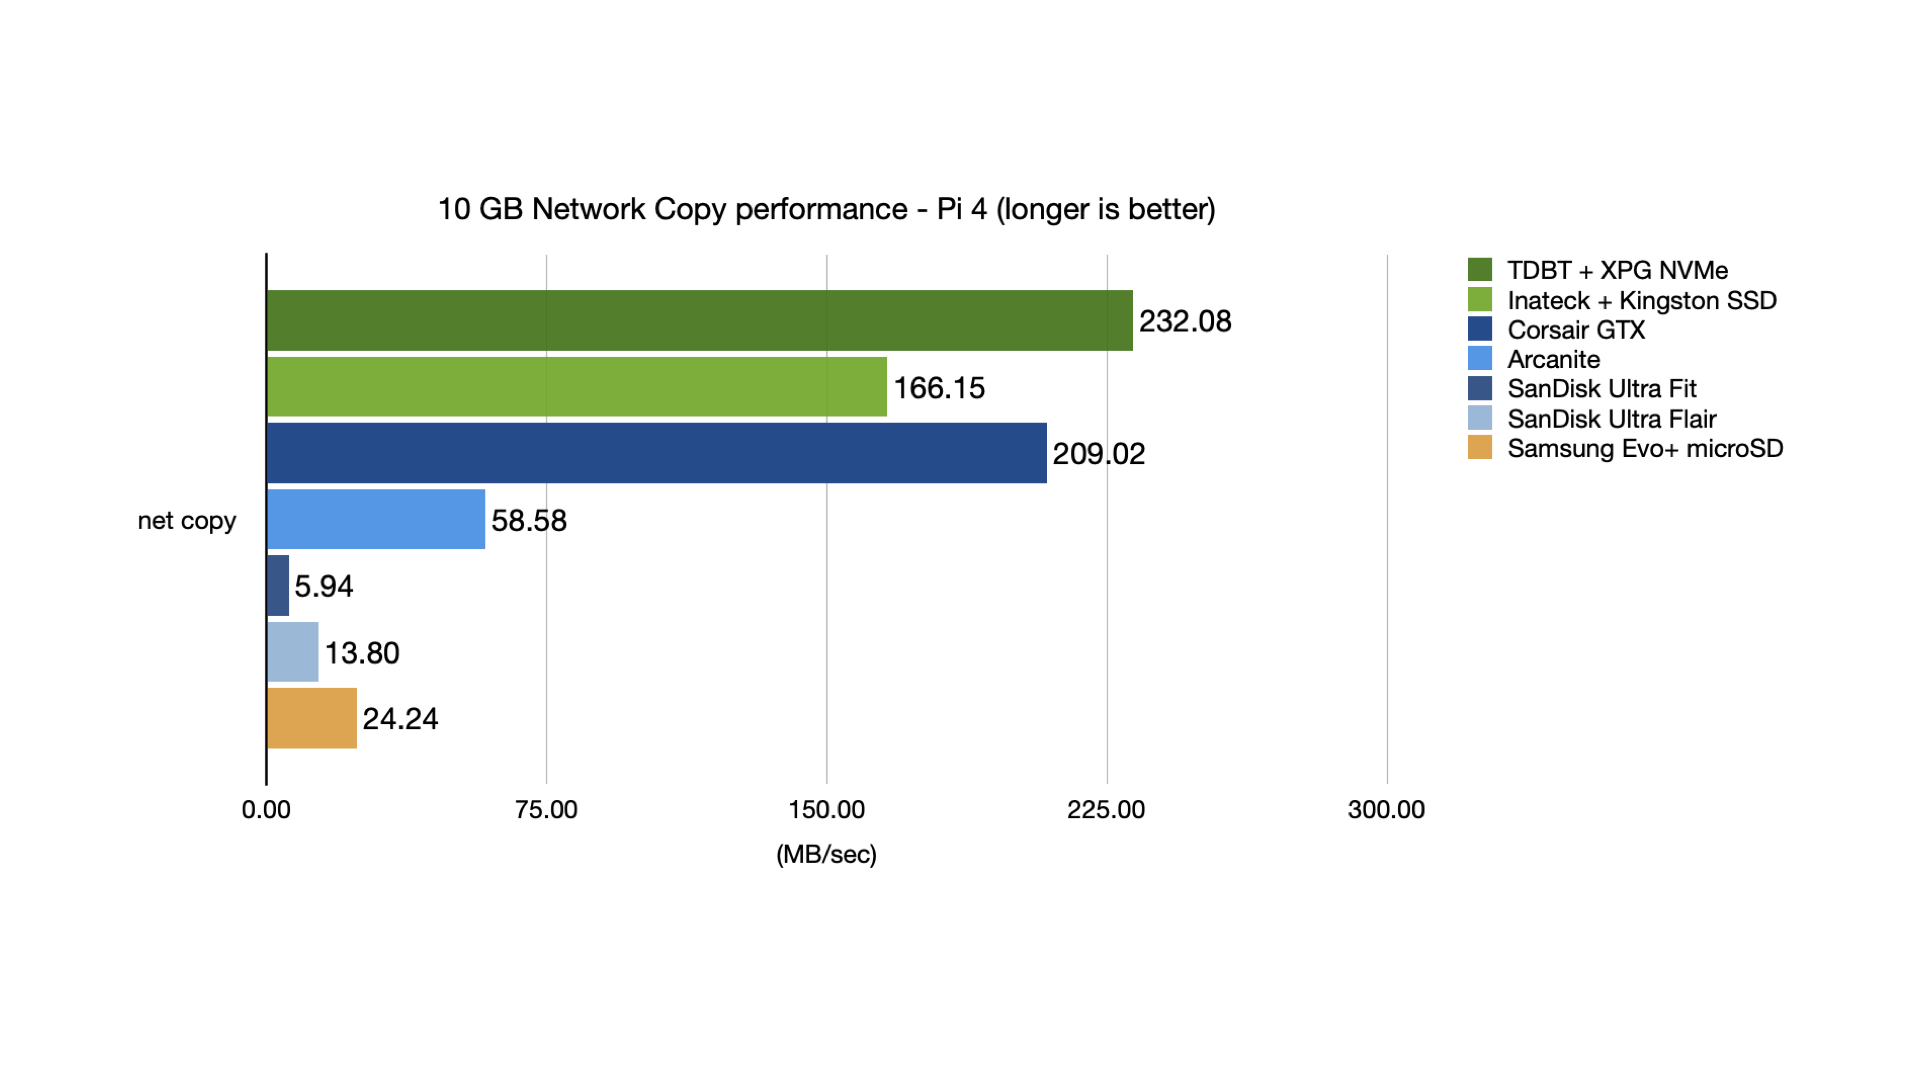 Large file network copy performance of different USB drives on Raspberry Pi